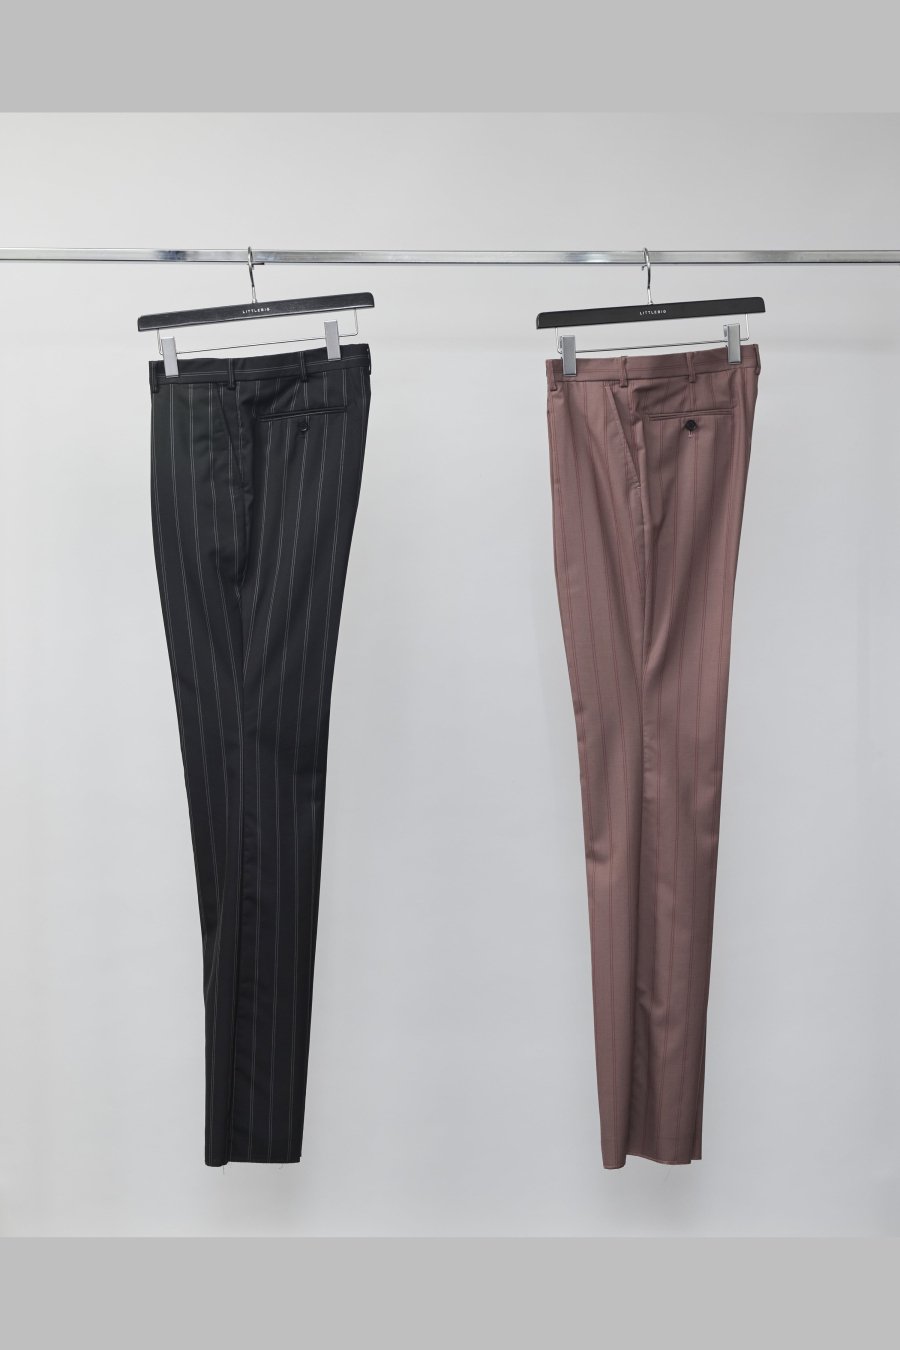 LITTLEBIG（リトルビッグ）の22ss Tucked Flare Trousers Black or  Pink（タックドトラウザーズ）の通販サイト-大阪 堀江 PALETTE art alive（パレットアートアライヴ）-